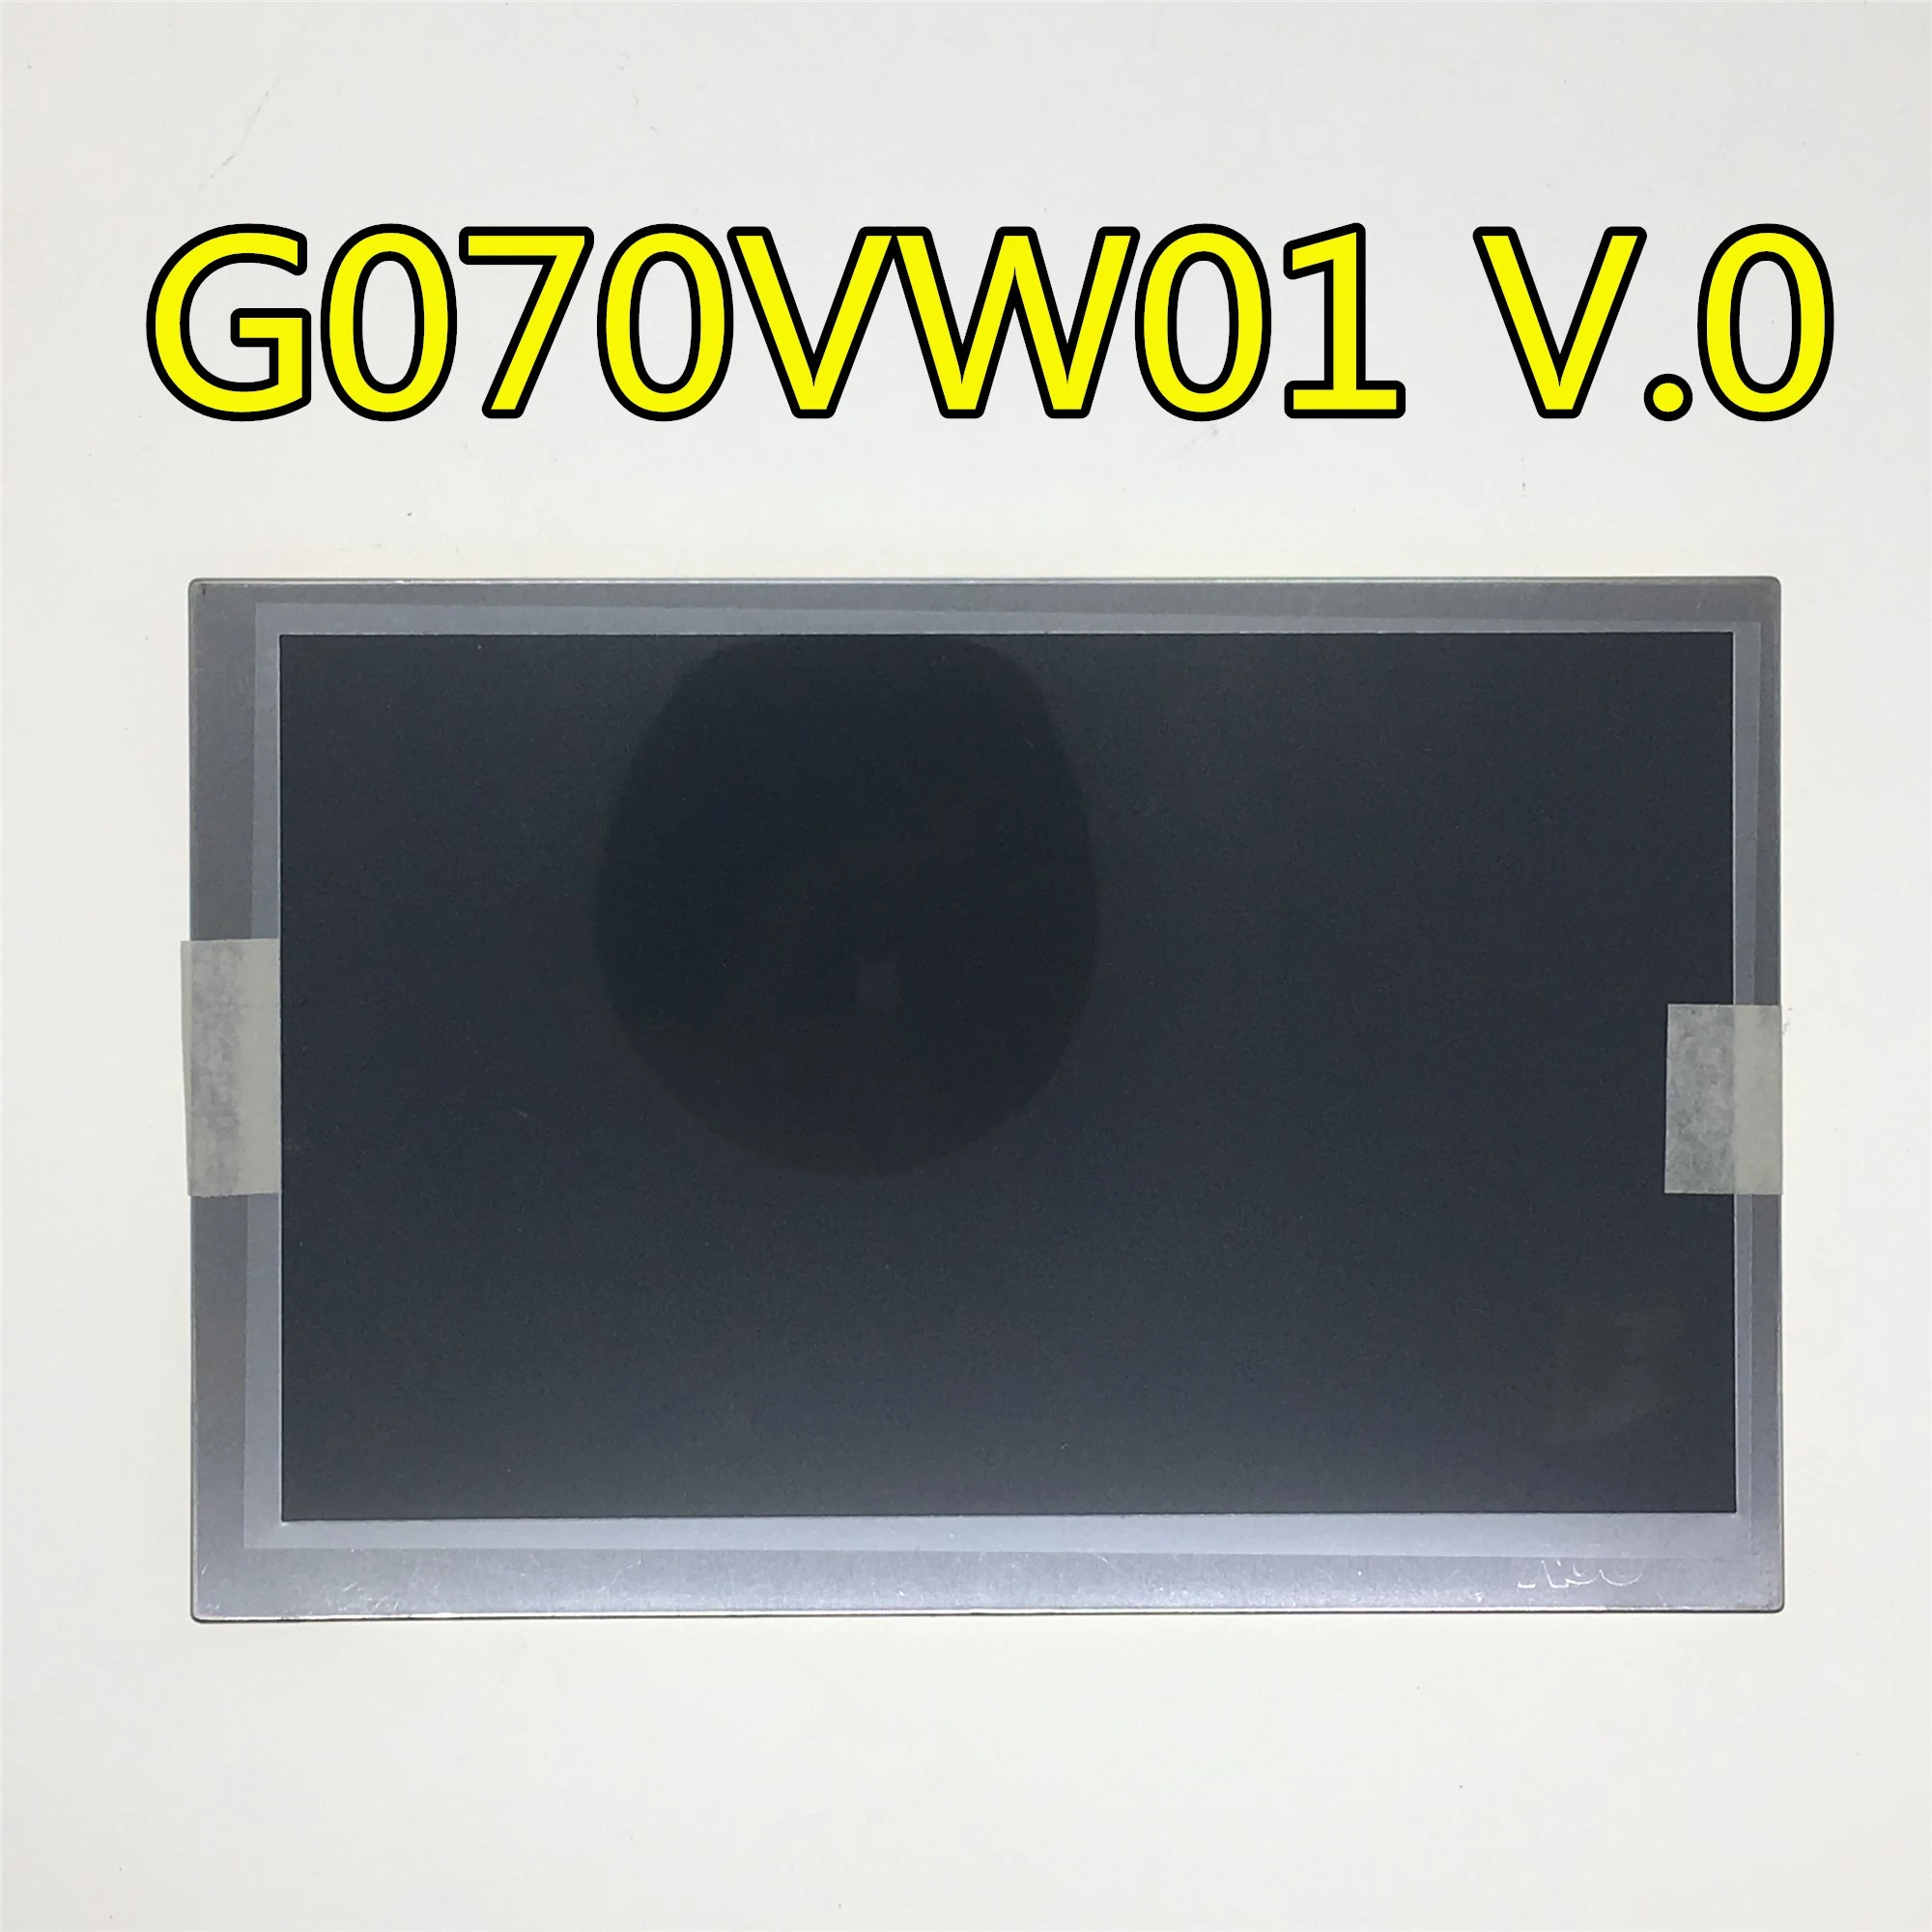 Can provide test video , 90 days warranty   G070VW01 V0 7'' Lcd panel G070VW01 V.0 tv stand with mount